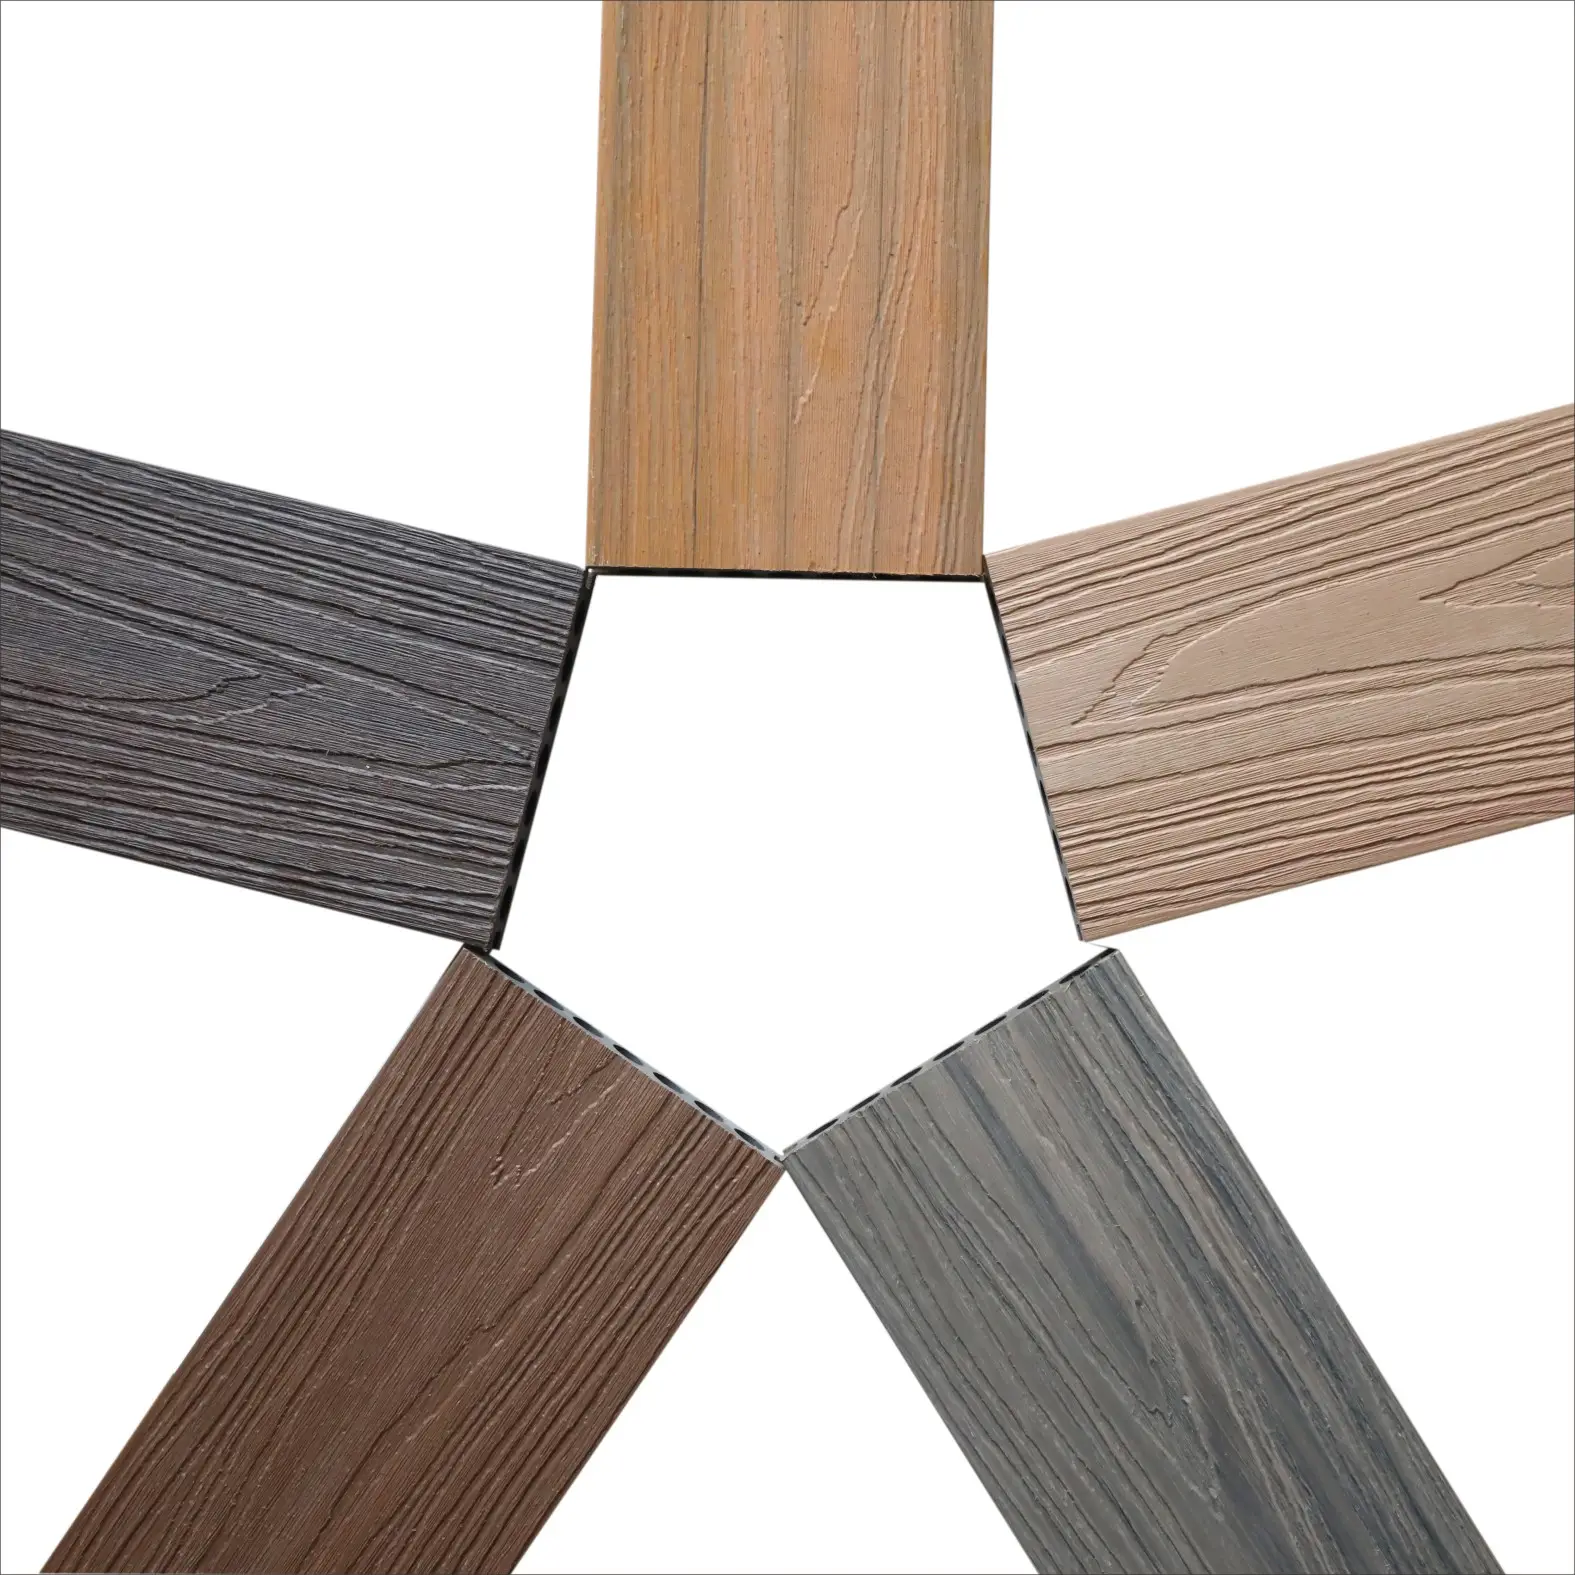 New technology teak wood wpc decking 3d embossed wooden plastic composite decking